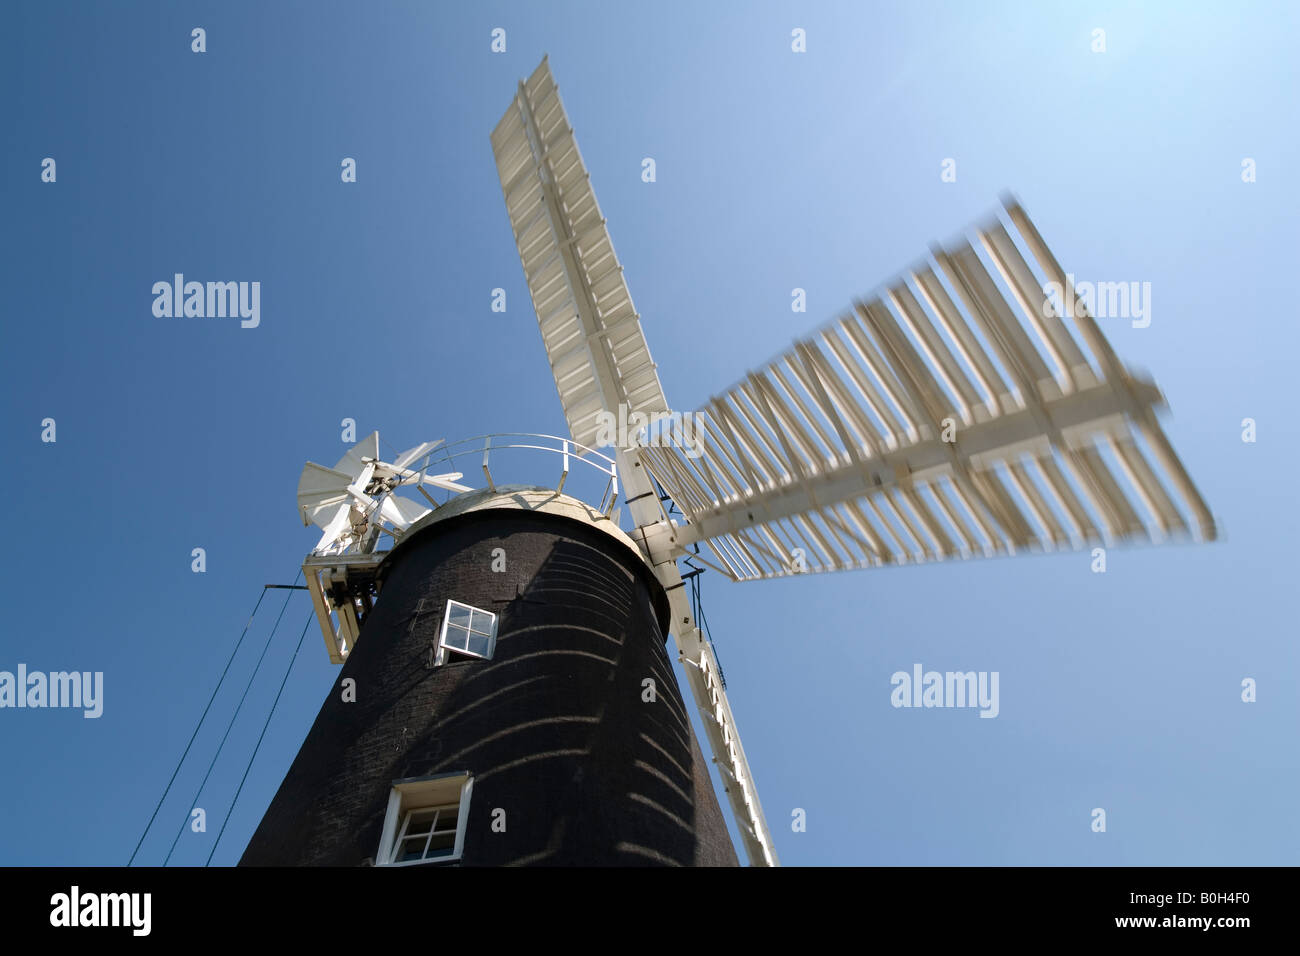 A working windmill seen against the blue sky, Swaffham Prior, Cambridgeshire, England Stock Photo